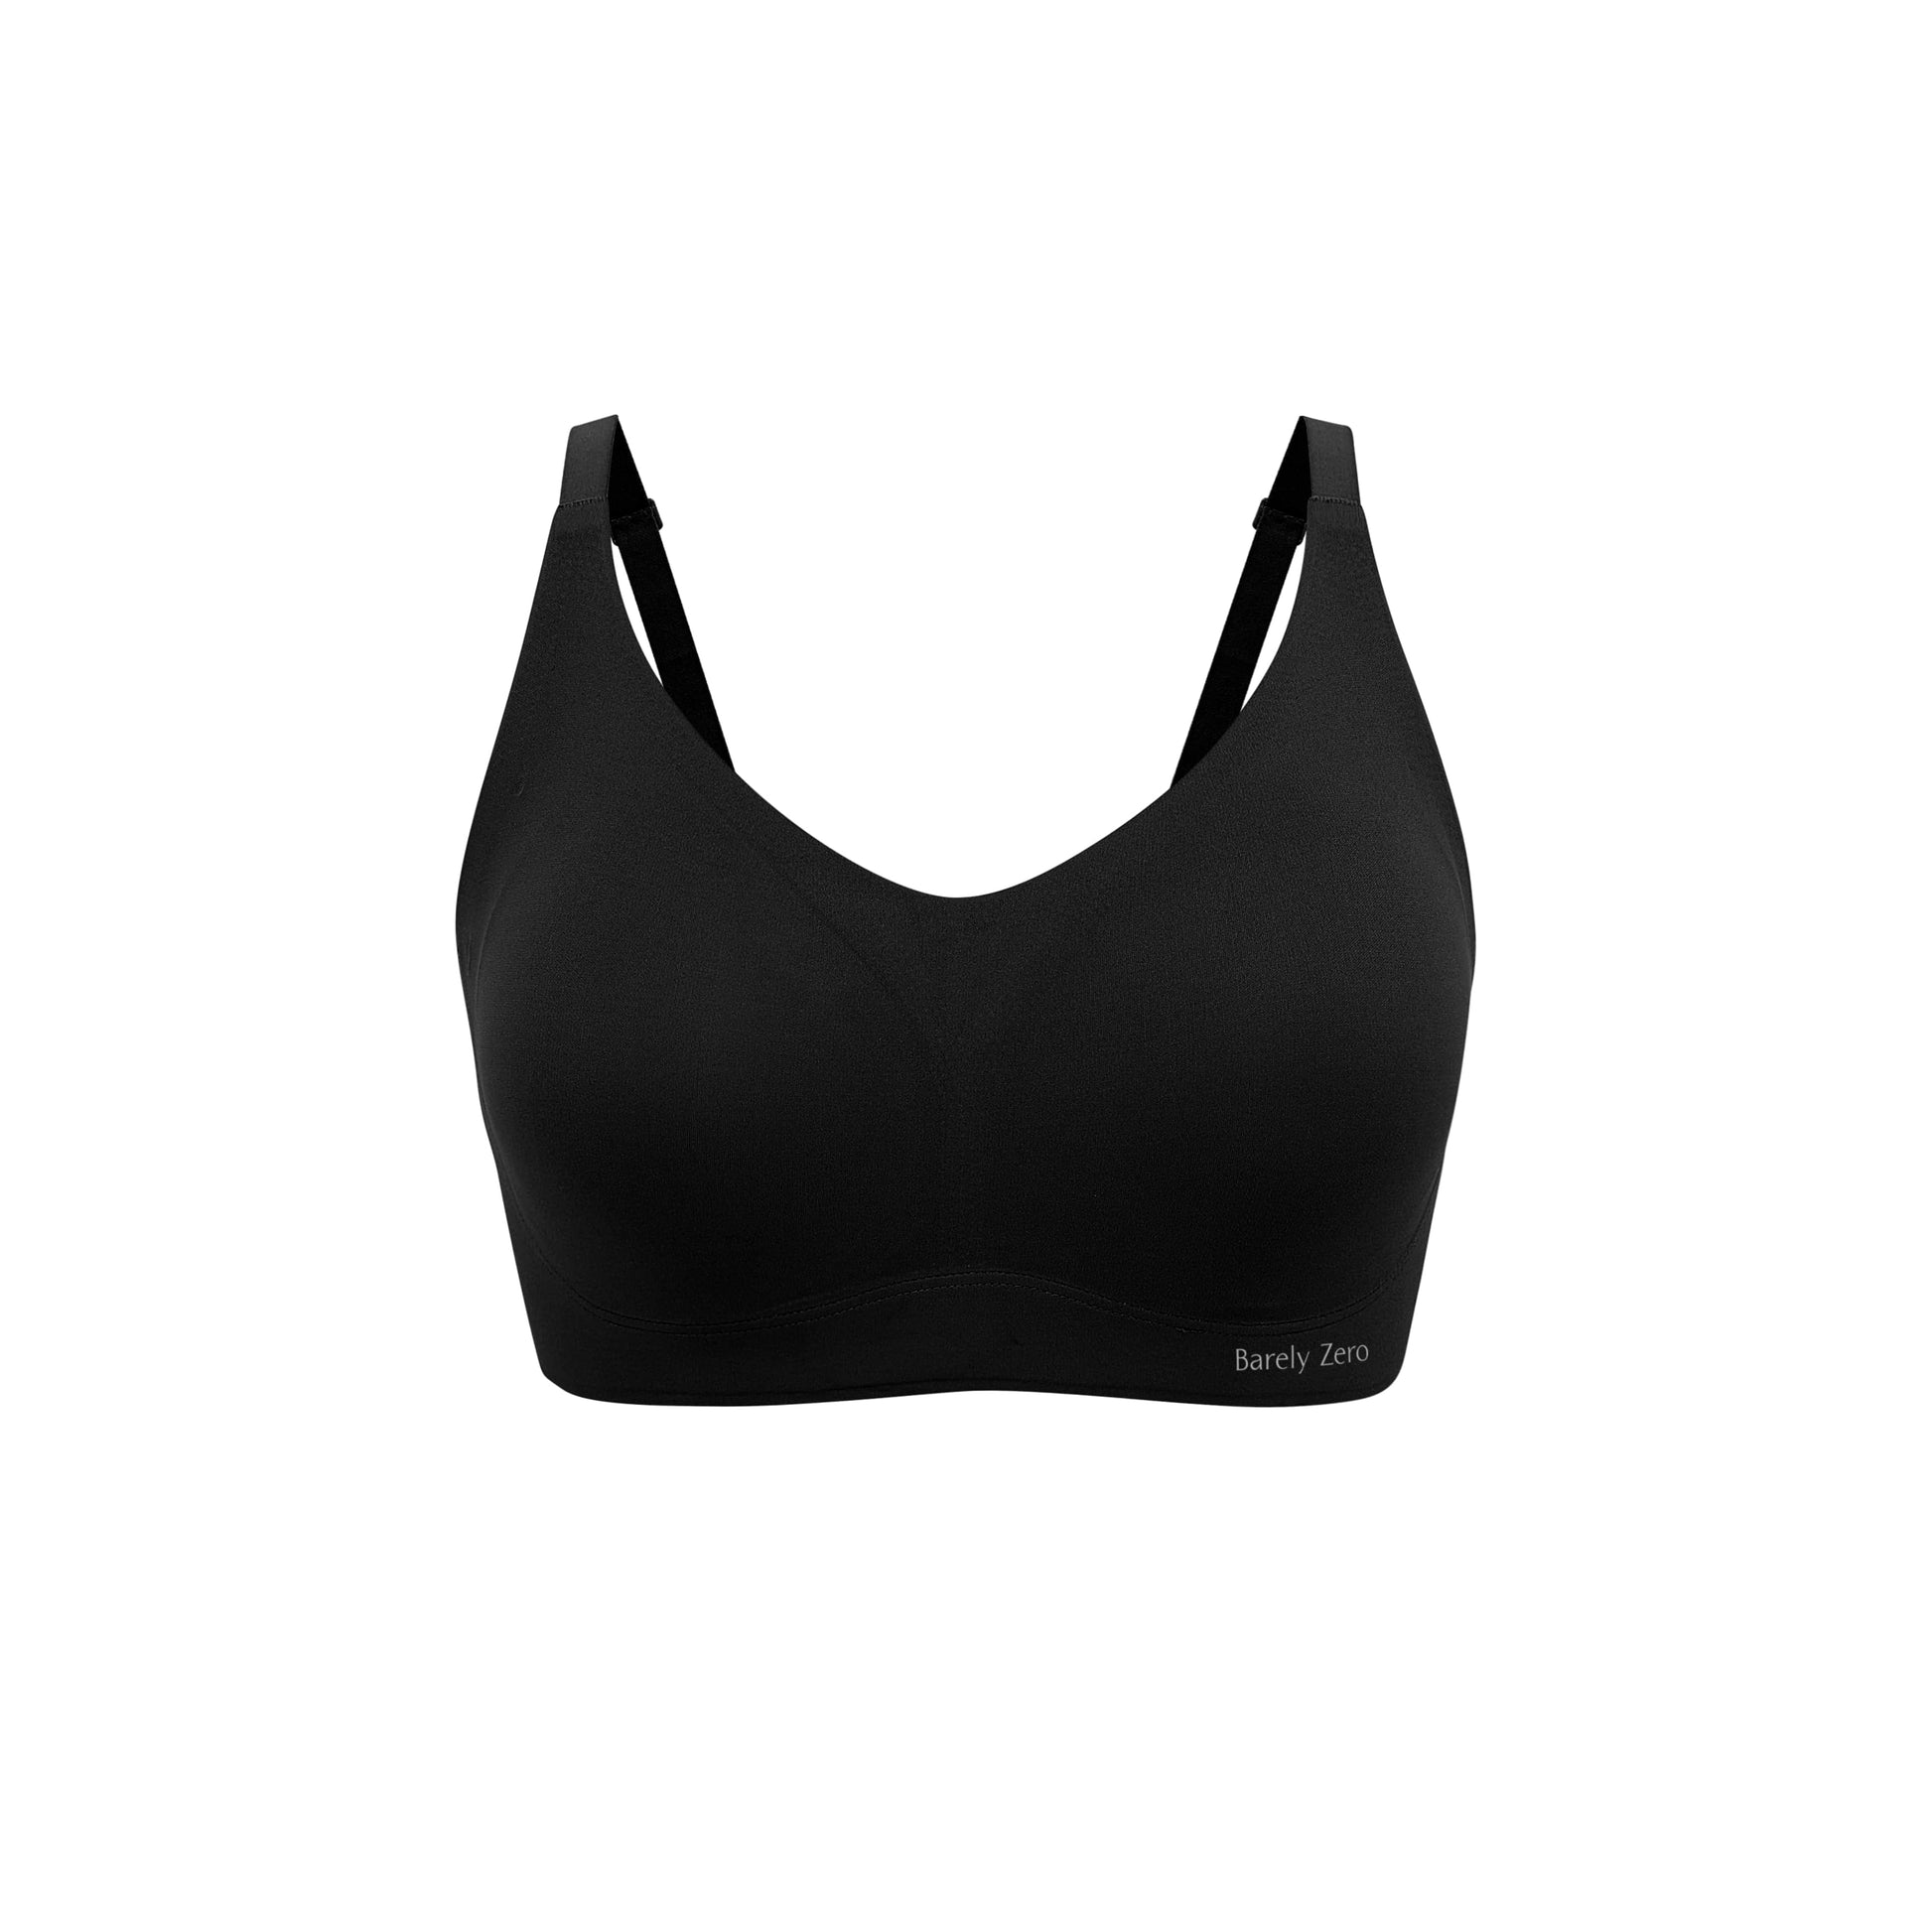 Plus Size Sheer Underwired Minimizer Barely Zero Bra For Women Perfect For  Everyday Wear 210623 From Dou01, $11.95